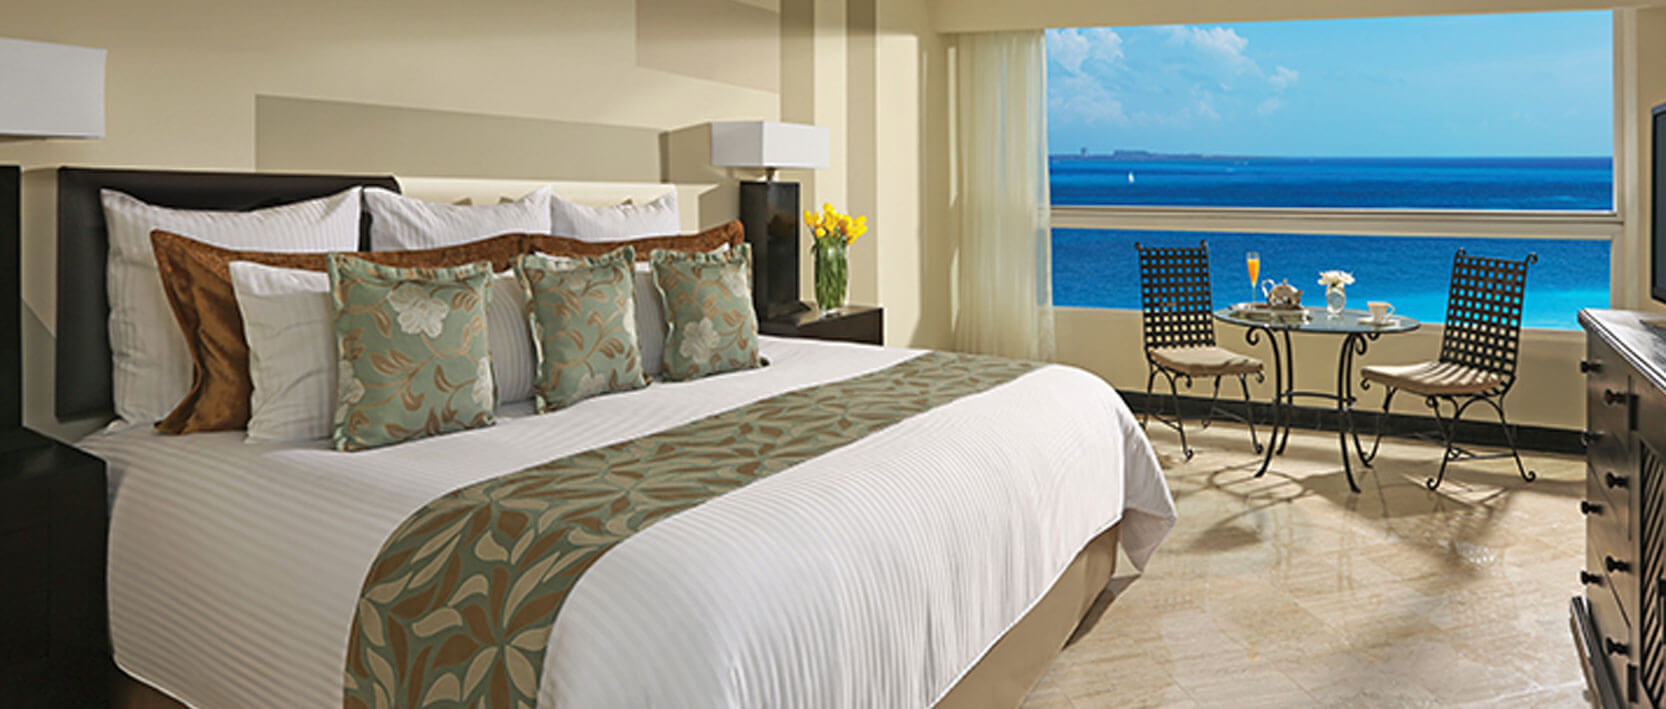 Dreams Sands Cancun Accommodations - Premium Deluxe Ocean Front